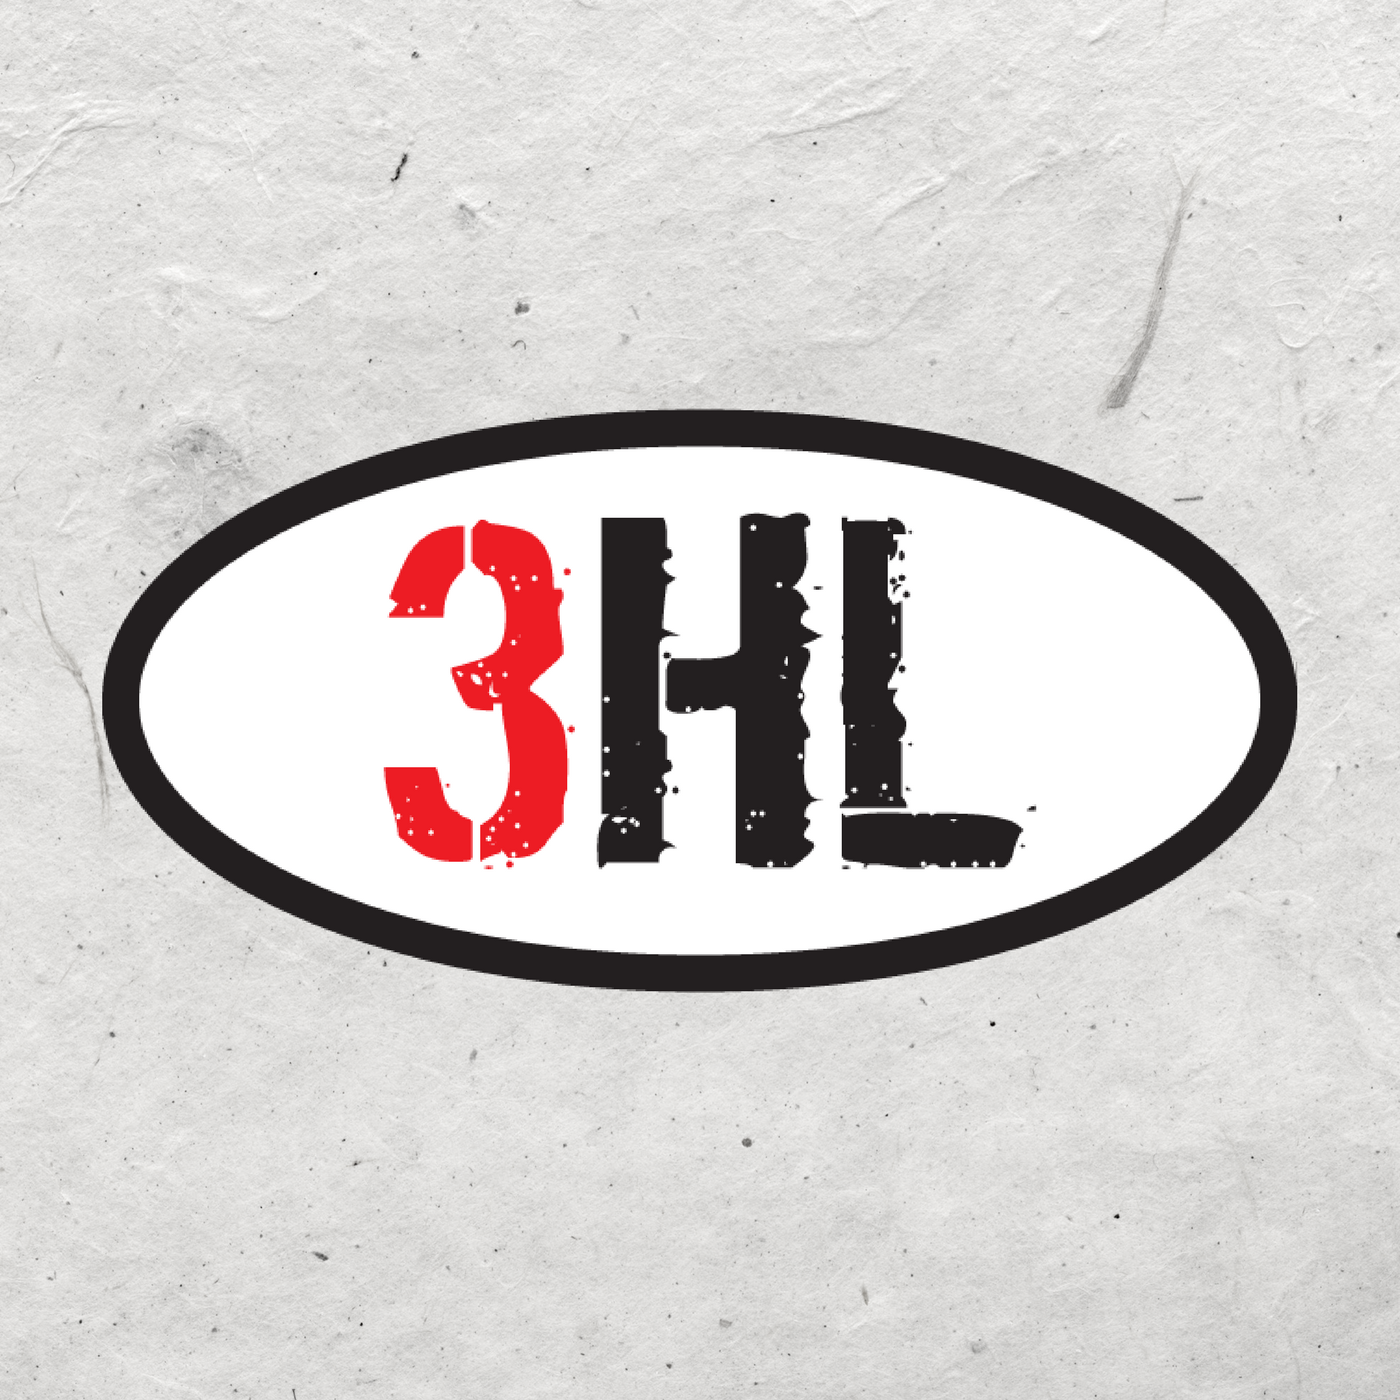 3HL - 3-11-24 - Hour 3 - Lloyd Cushenberry's Contract Details Come Out